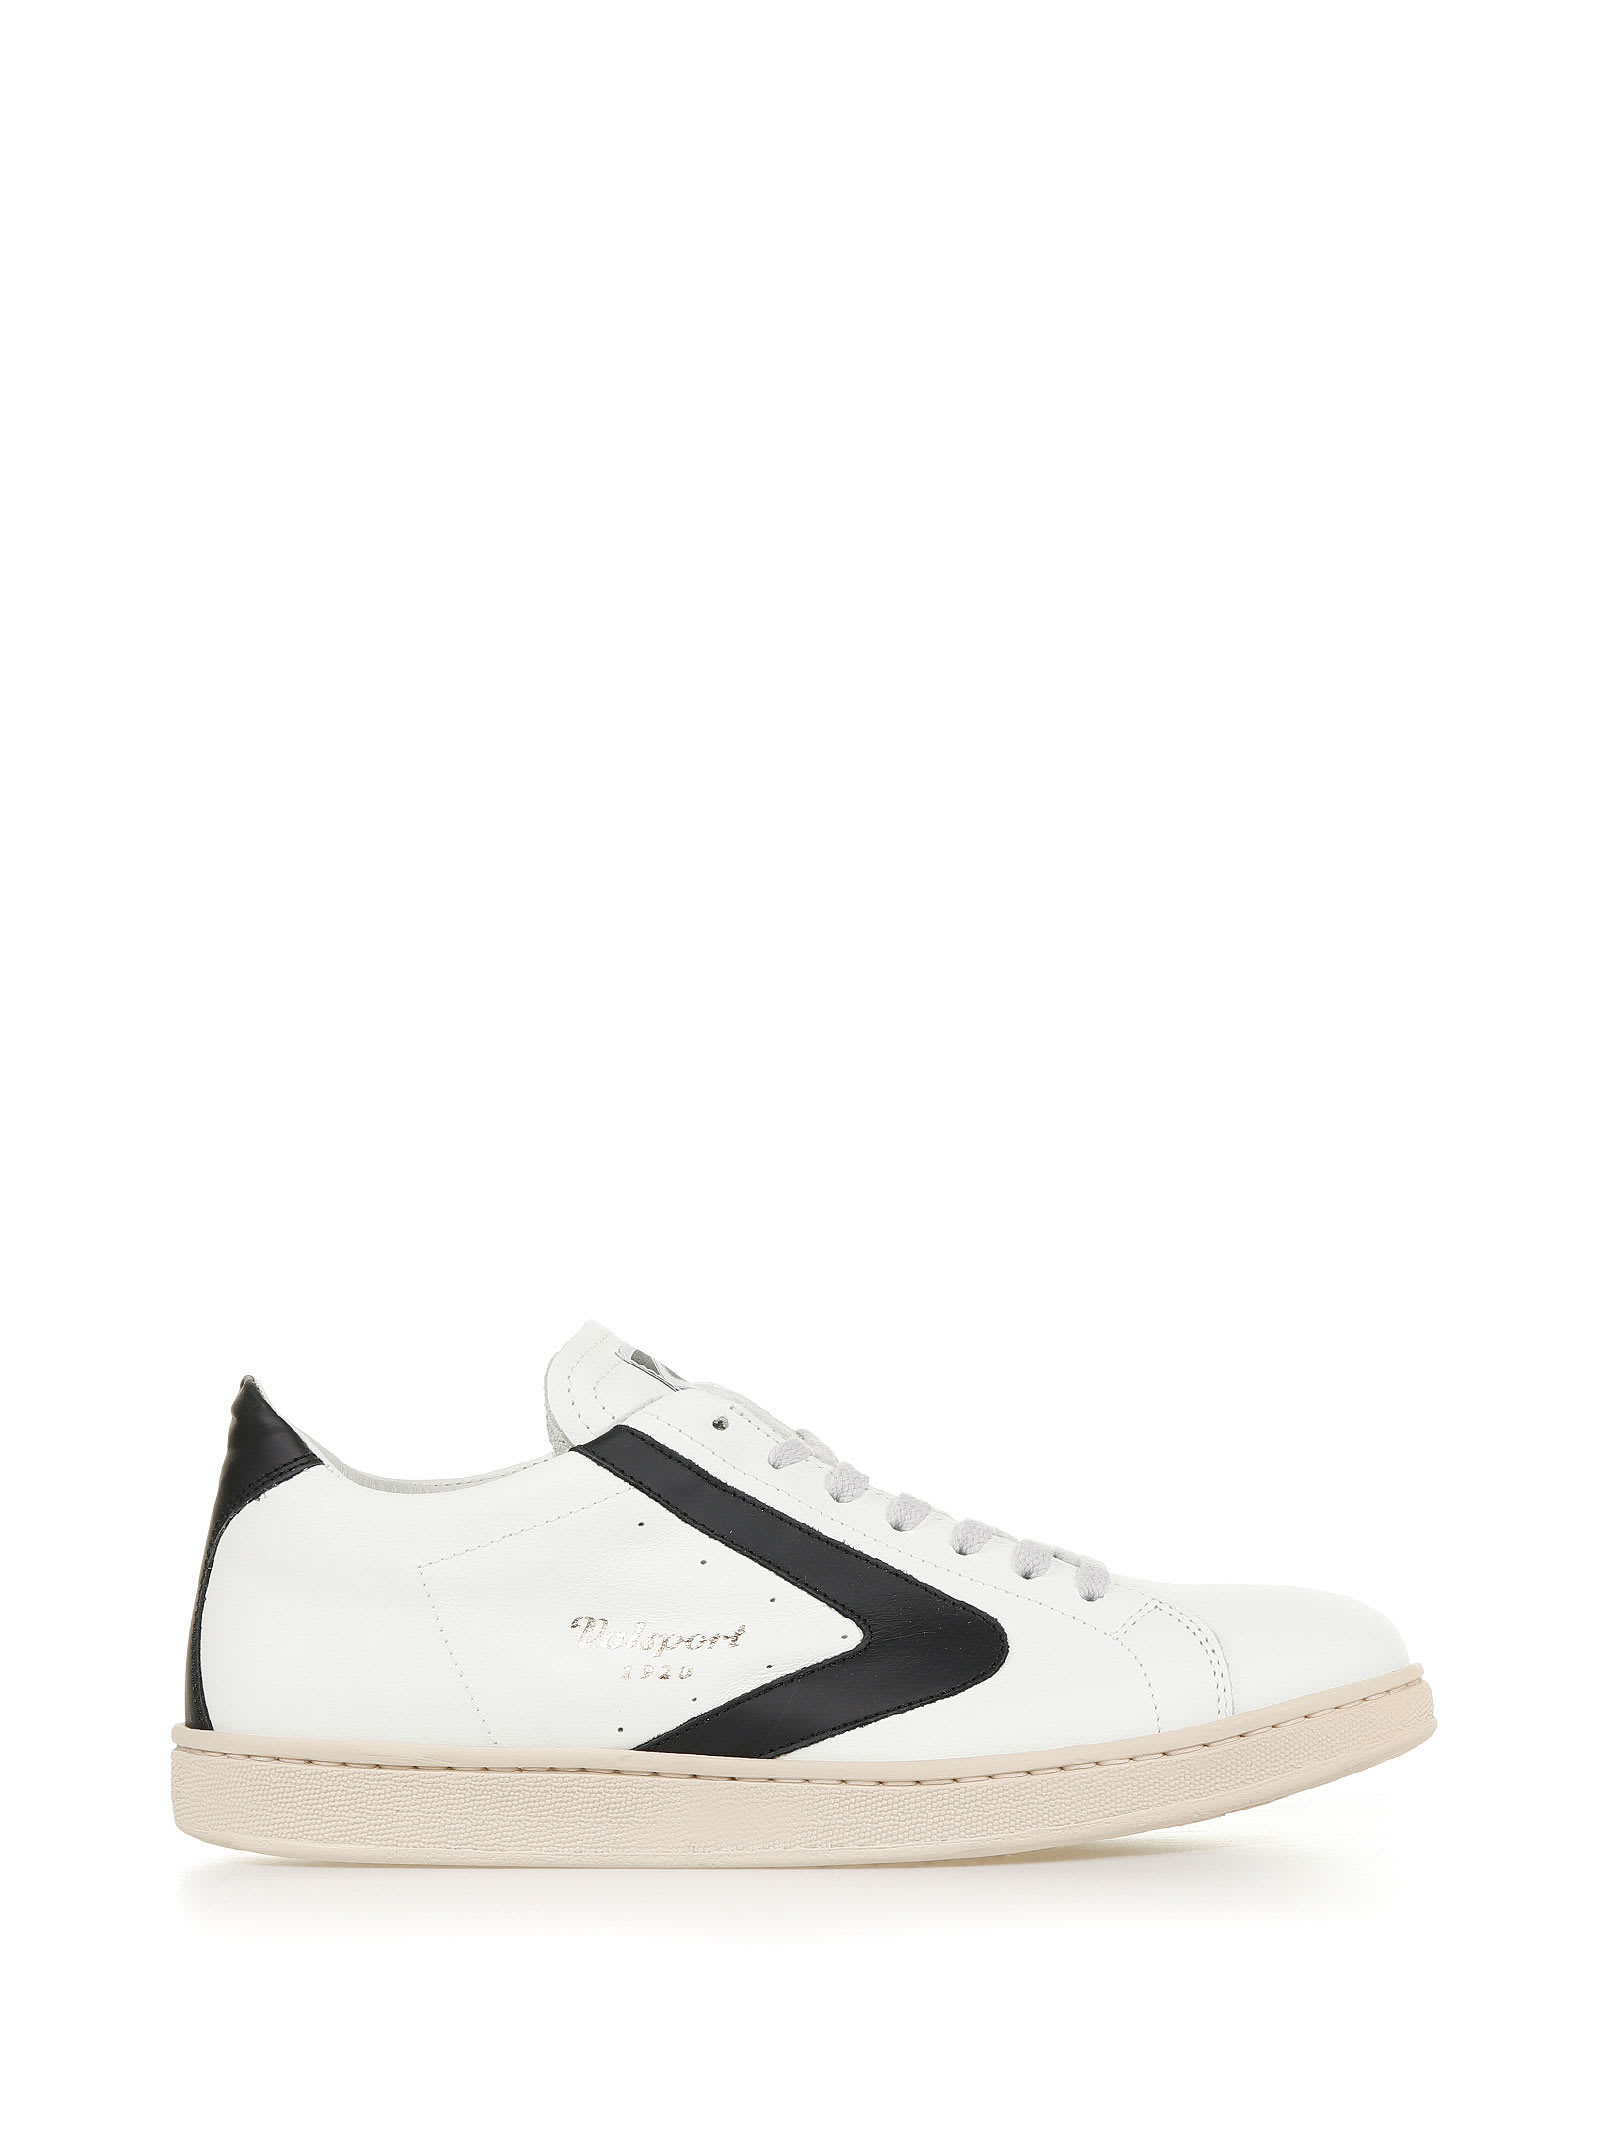 Valsport Tournament Nappa Leather Sneakers